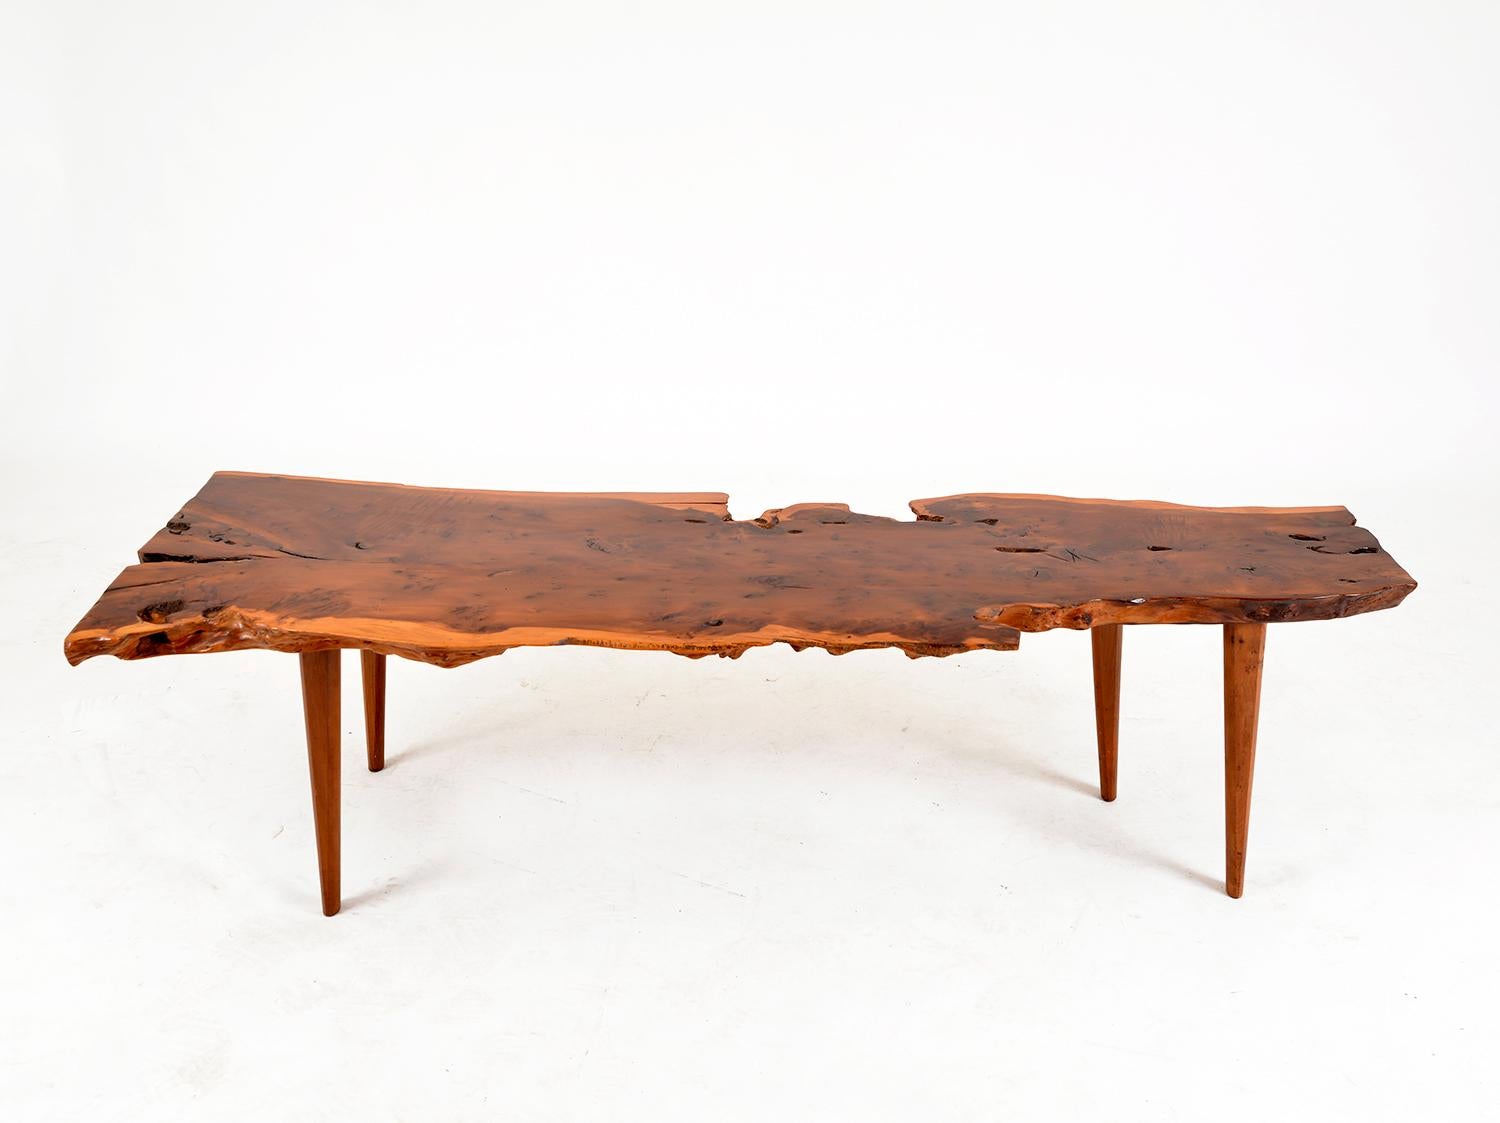 This large solid yew wood plank coffee was table made by the English makers Reynolds of Ludlow. This is a very stylish and solid piece, with a wonderful finish, rich figuring and a natural waney-edge. Much like the furniture of designer George